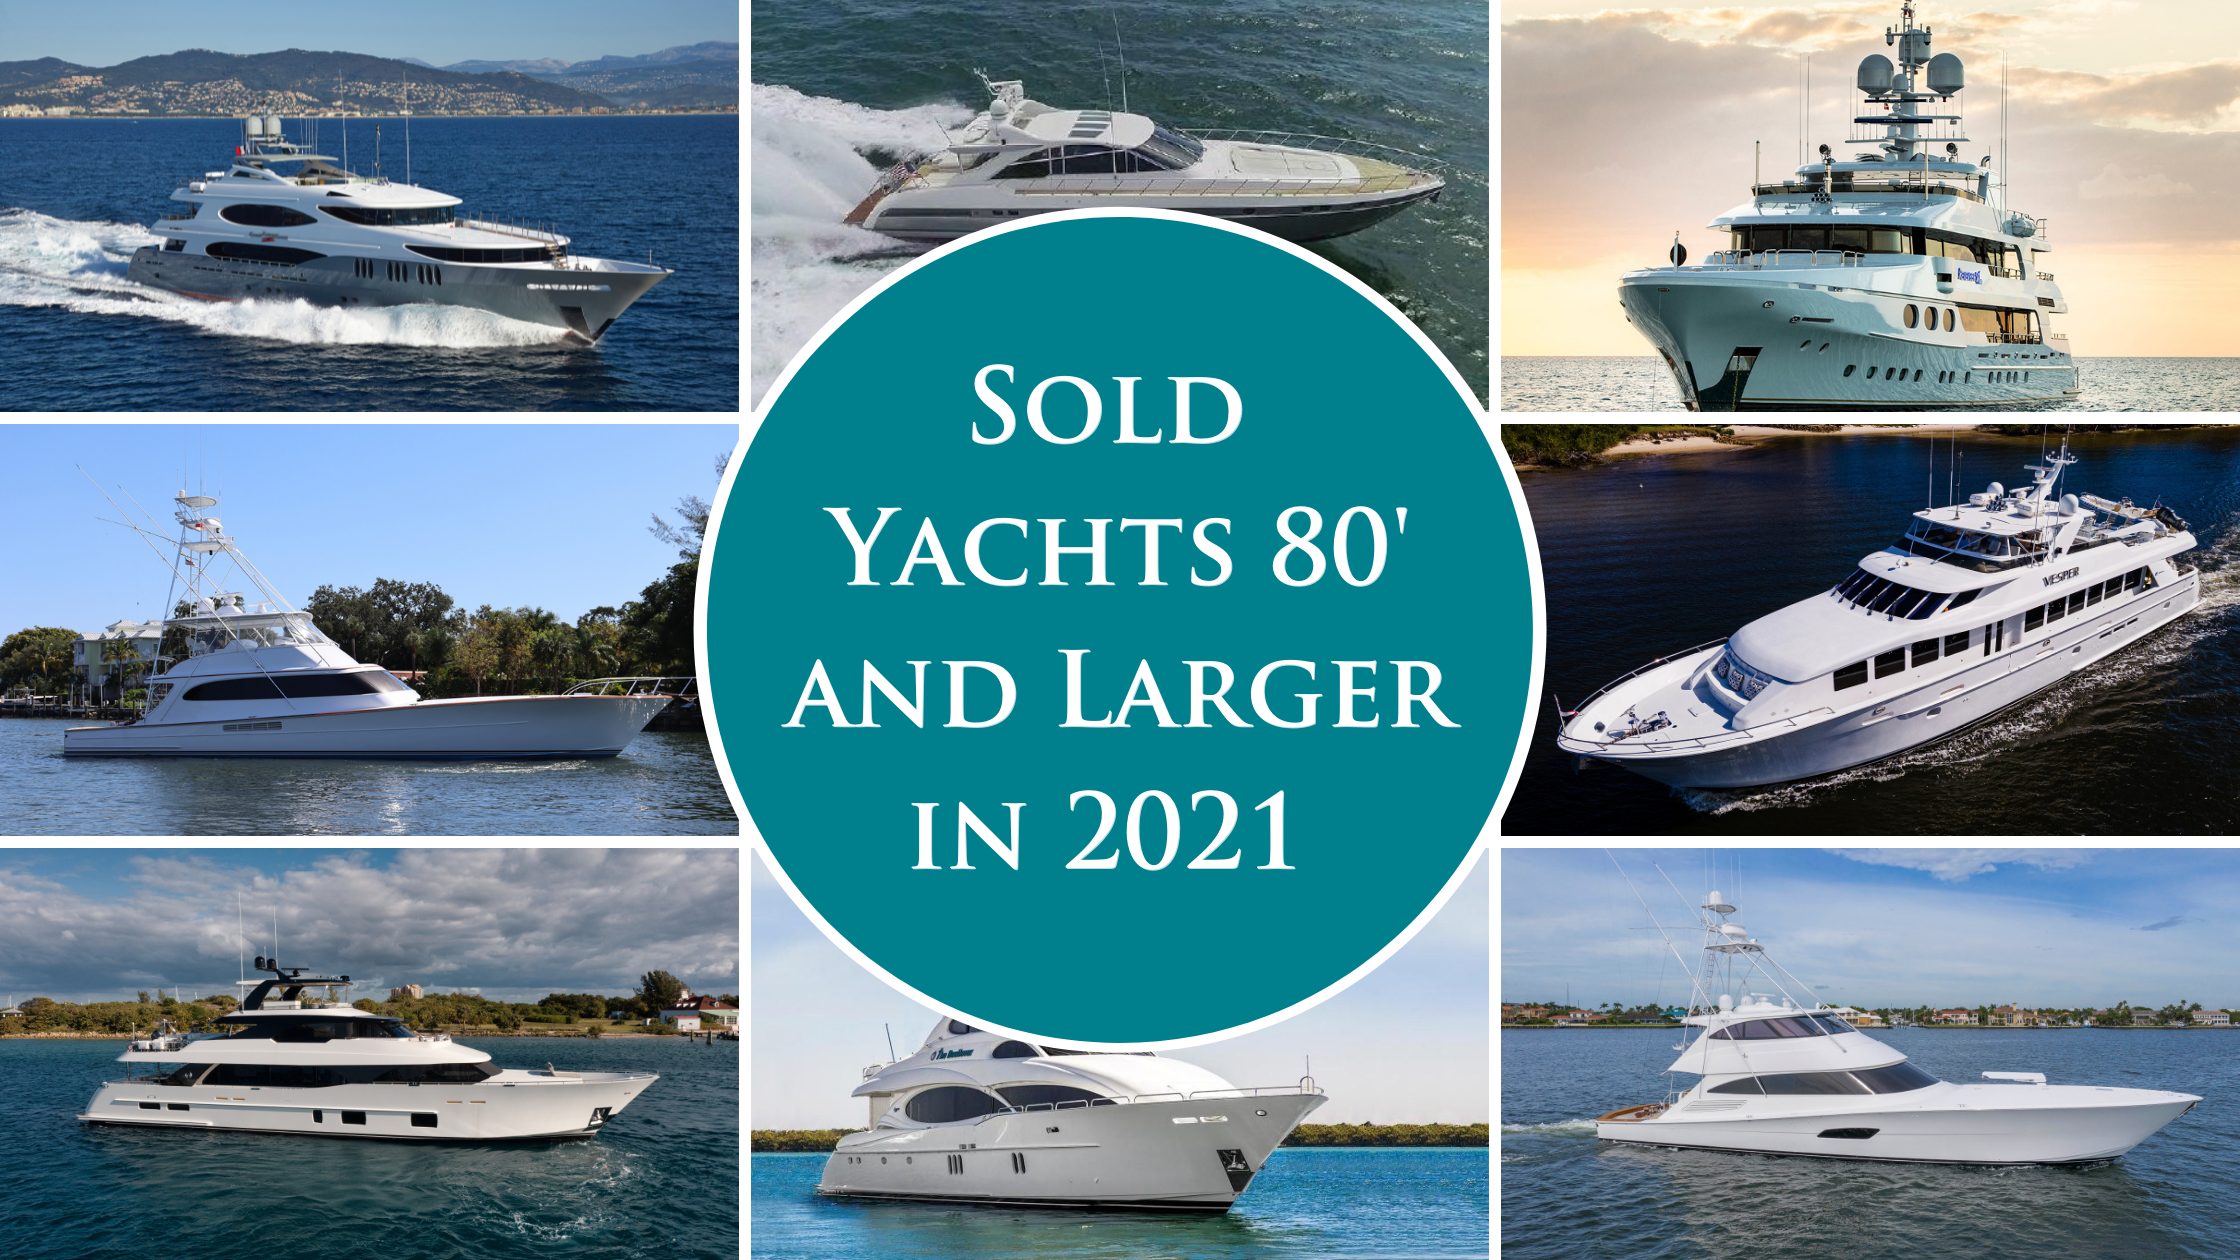 Sold Yachts 80′ and Larger in 2021